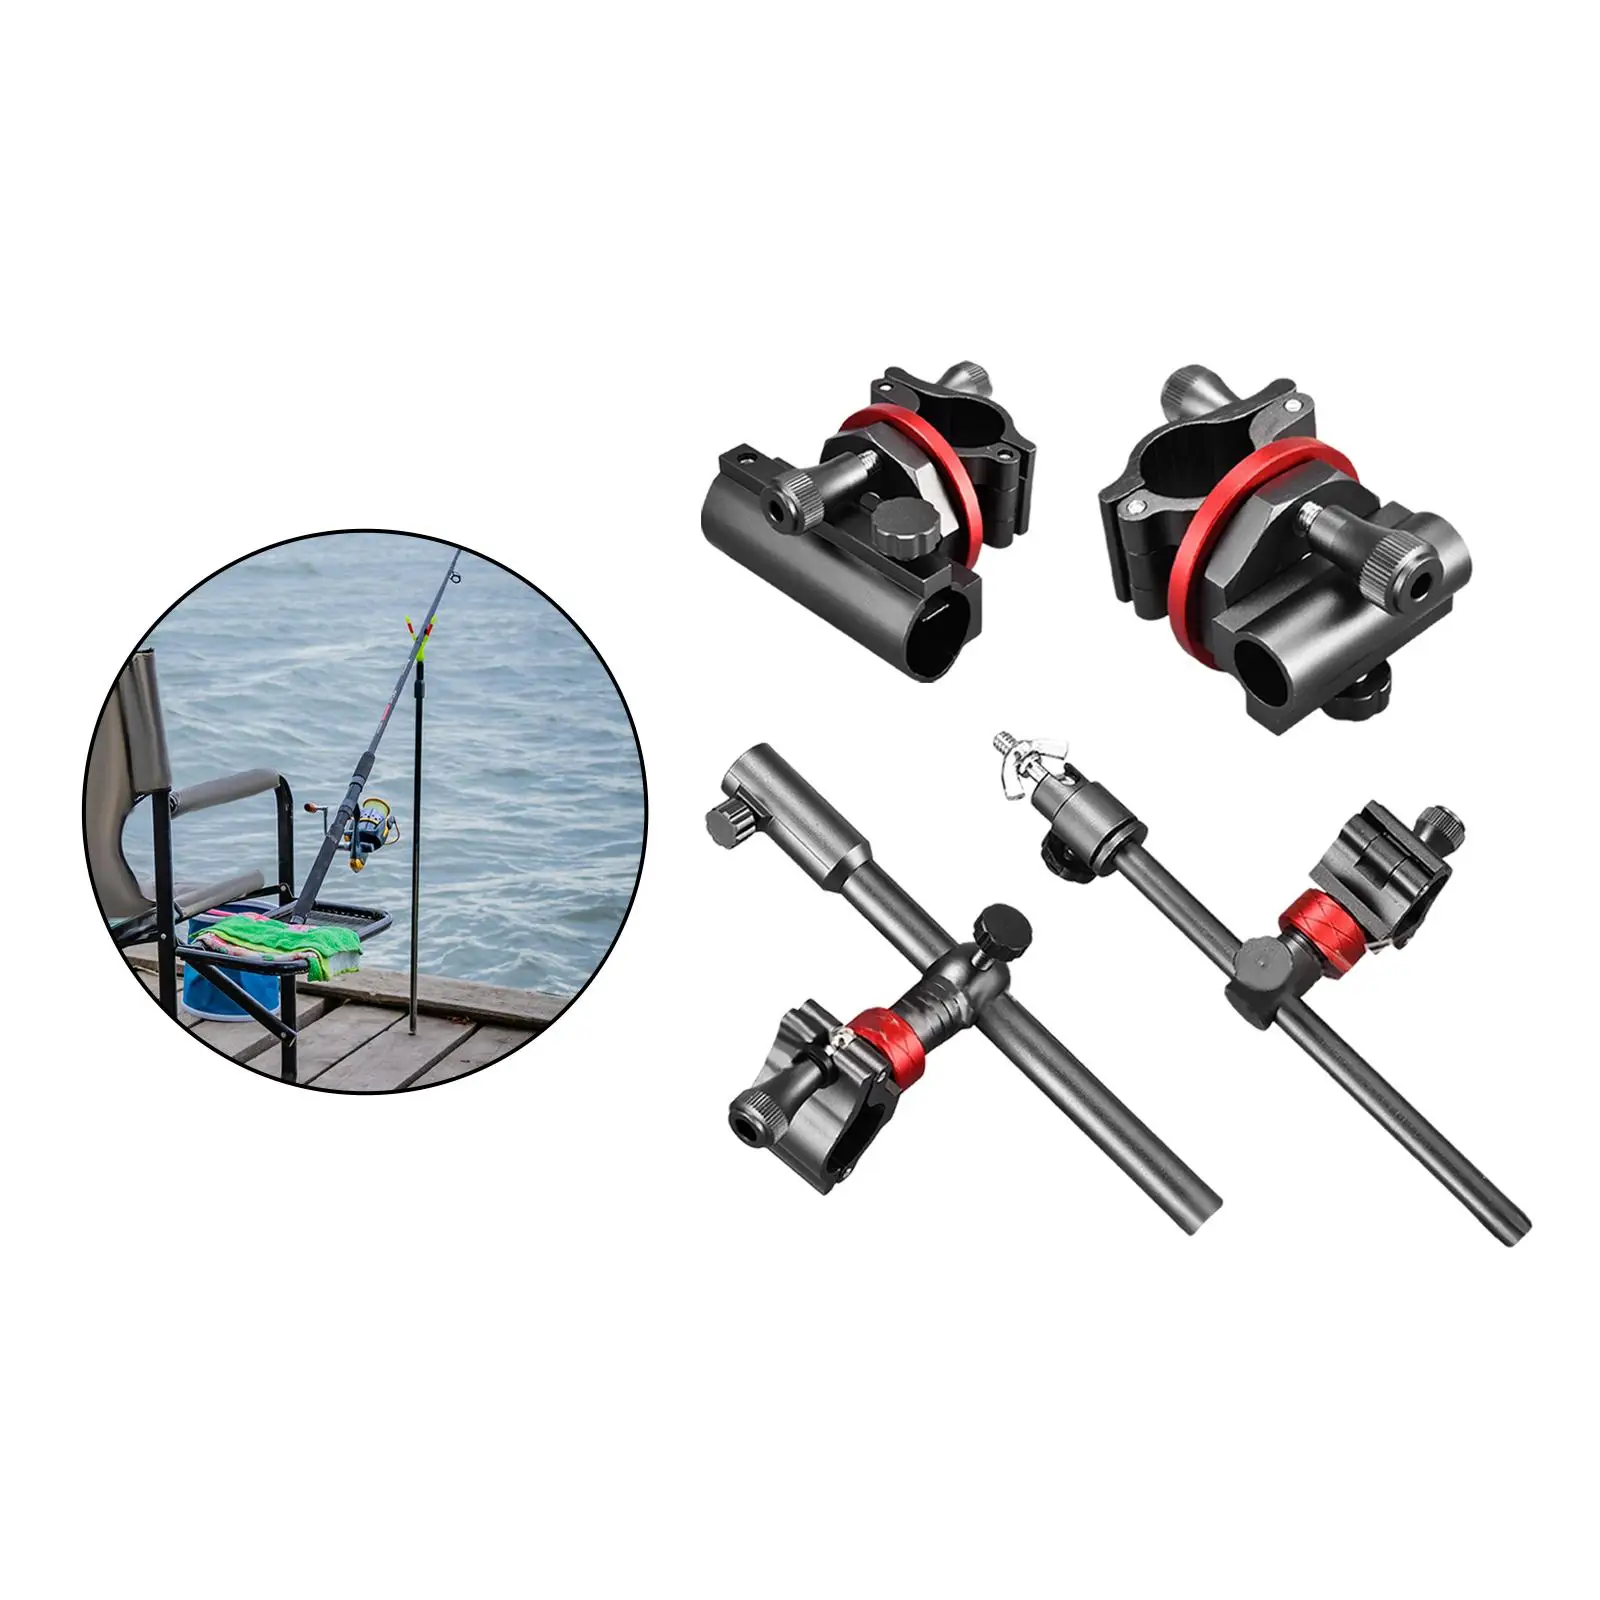 Multifunctional Fishing  Accessories Turret Rack Fish Cage  Box Holder Light Stand Stable Adjustable  Accessories for Outdoors